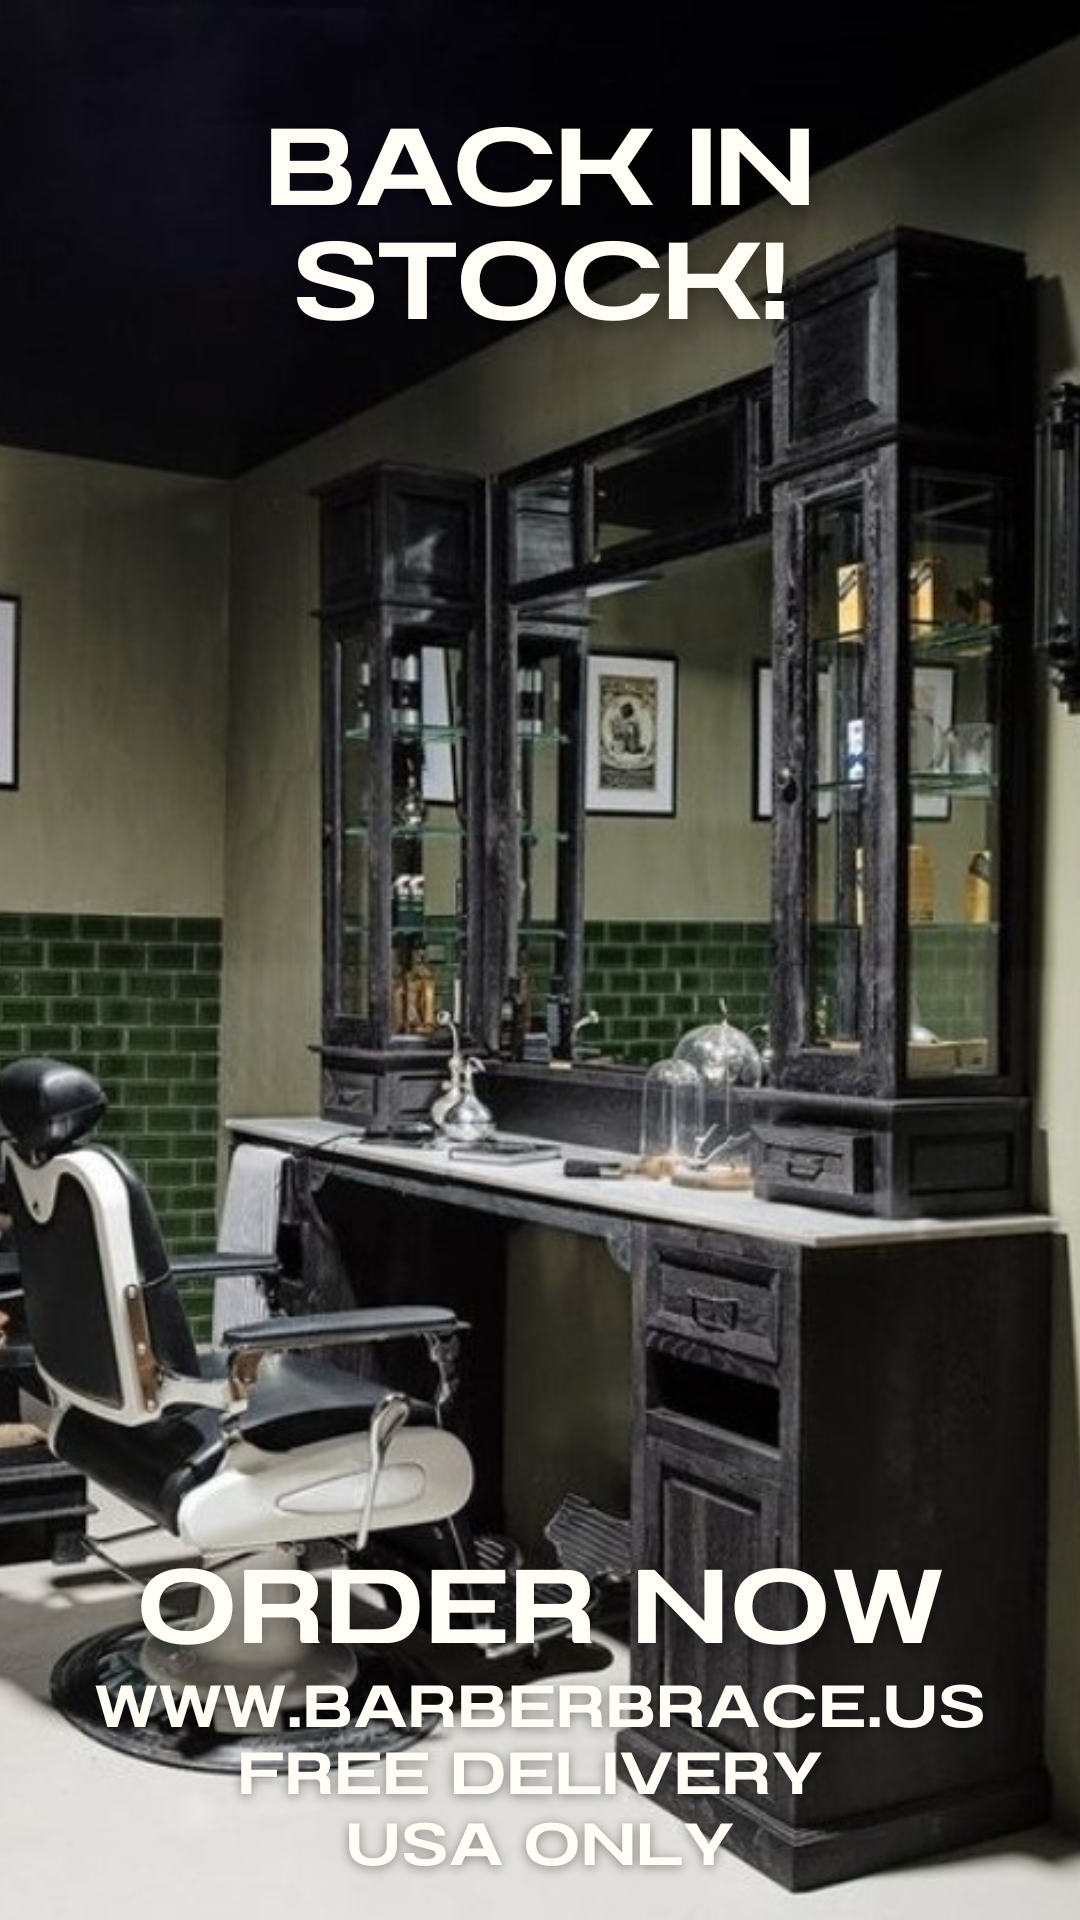 Barberstations now back in stock free delivery usa | Barberfurniture |